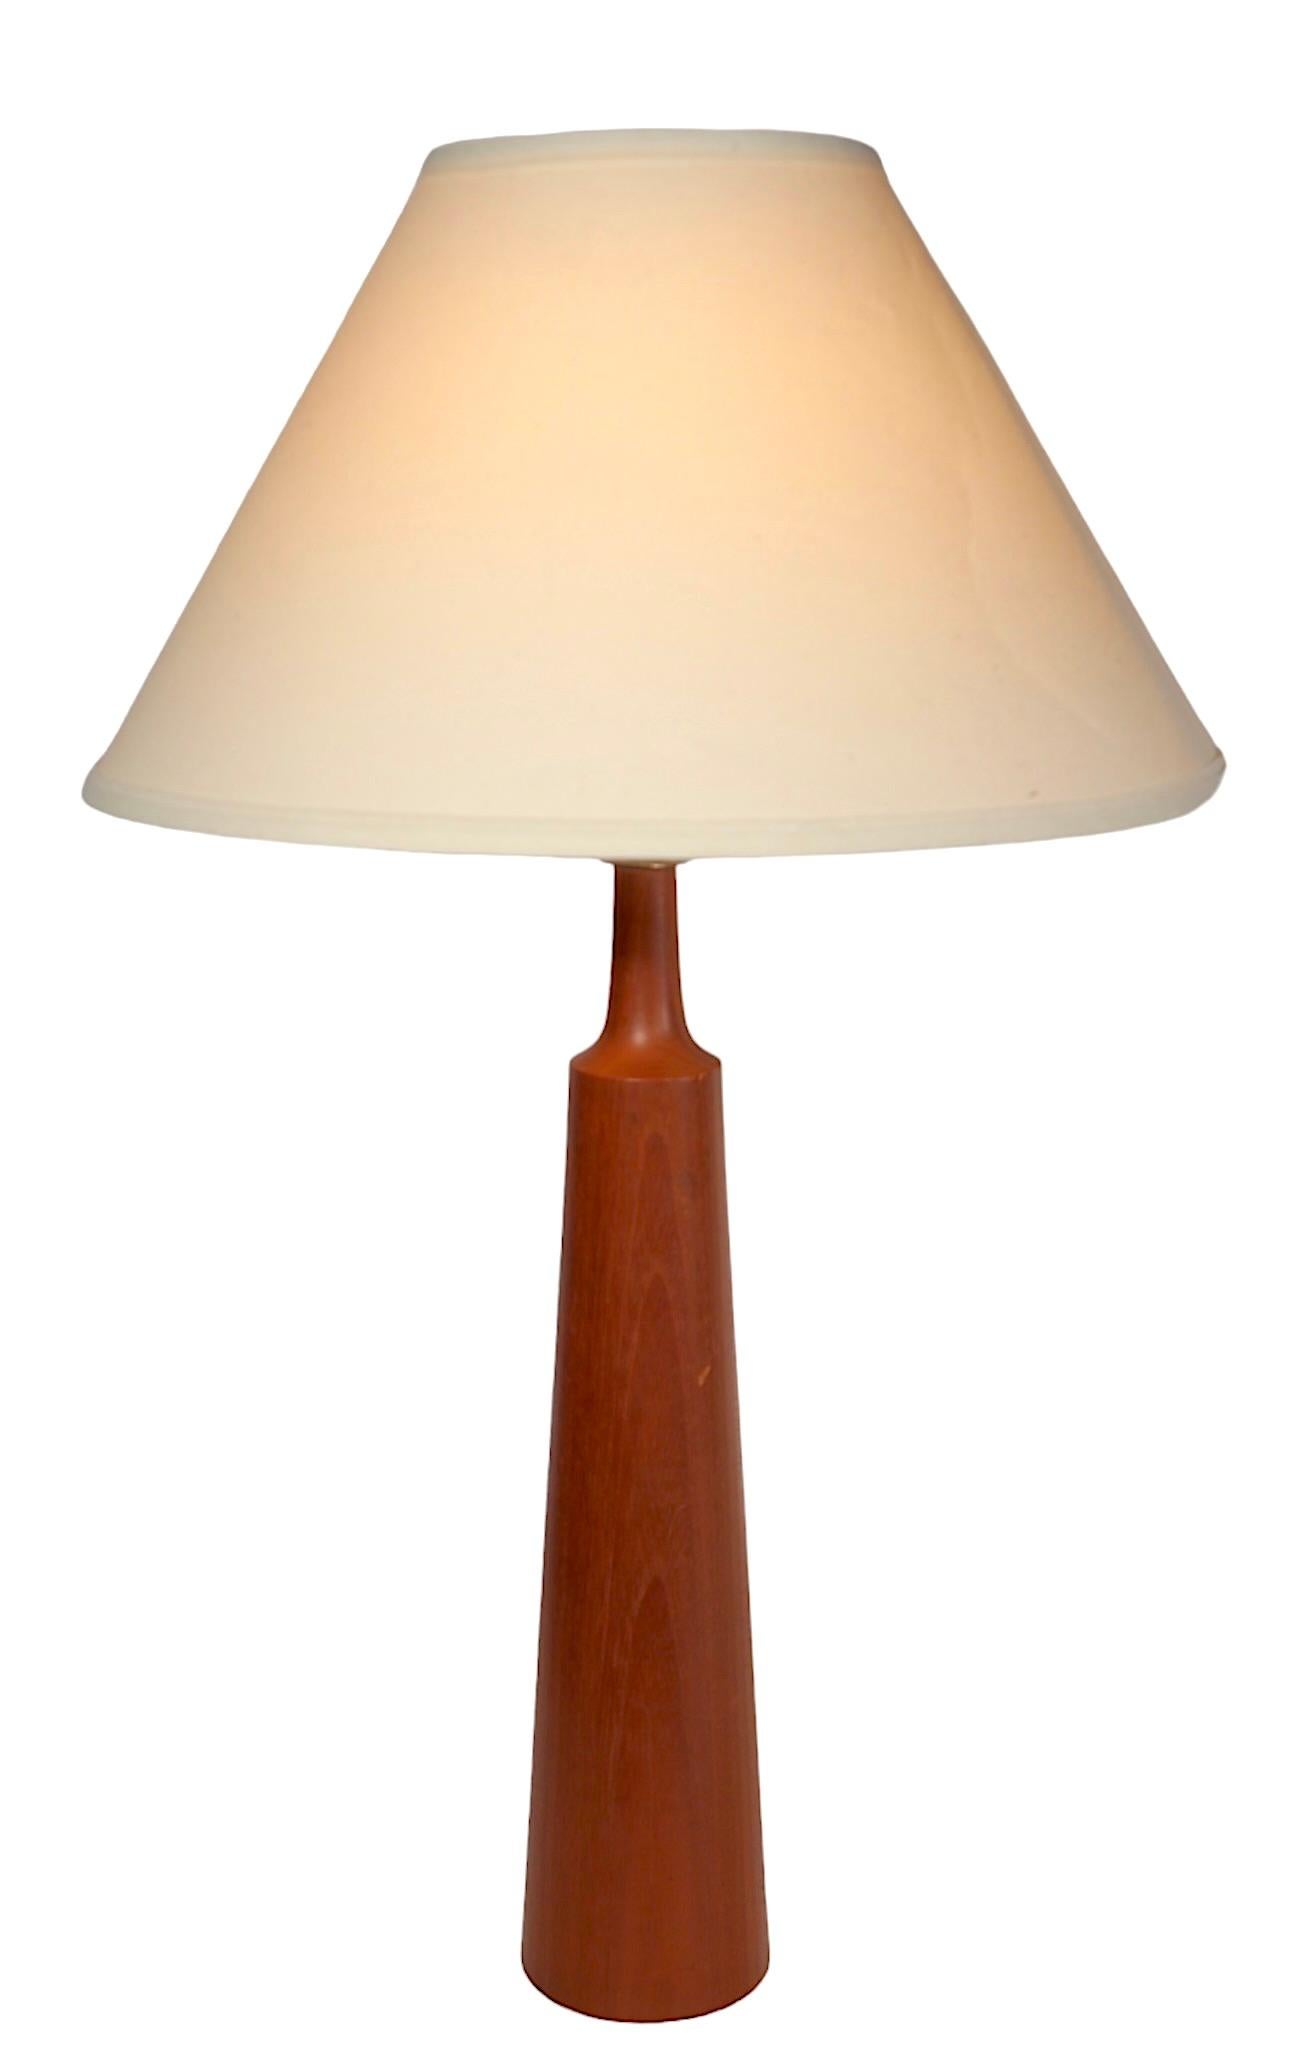 Classic Danish Mid Century Modern table lamp constructed of solid teak, circa 1950/1960’s. The lamp is of bottle form with a tapered cylindrical body, and tapering pole neck. This example is in very fine, clean, original, and working condition,